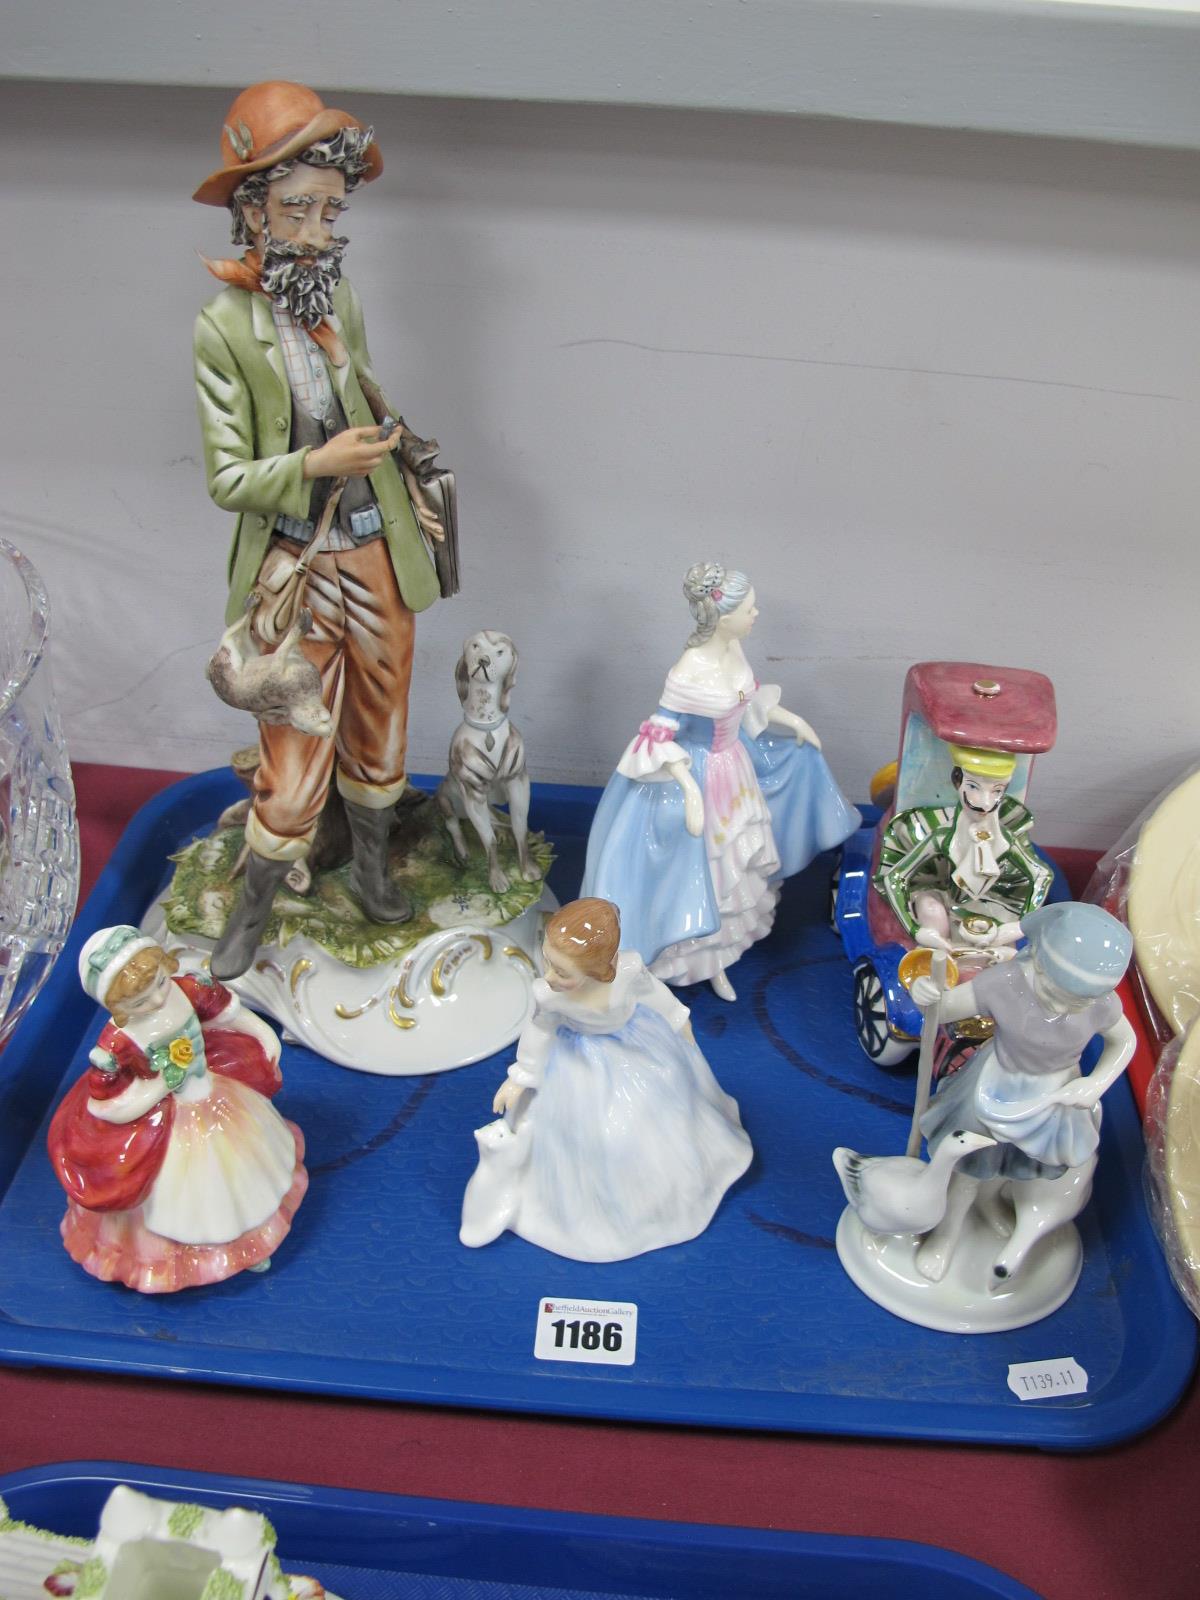 Royal Doulton Figurines 'Andrea' HN3058, Valerie HN2107, Southern Belle and a Capo di Monte style